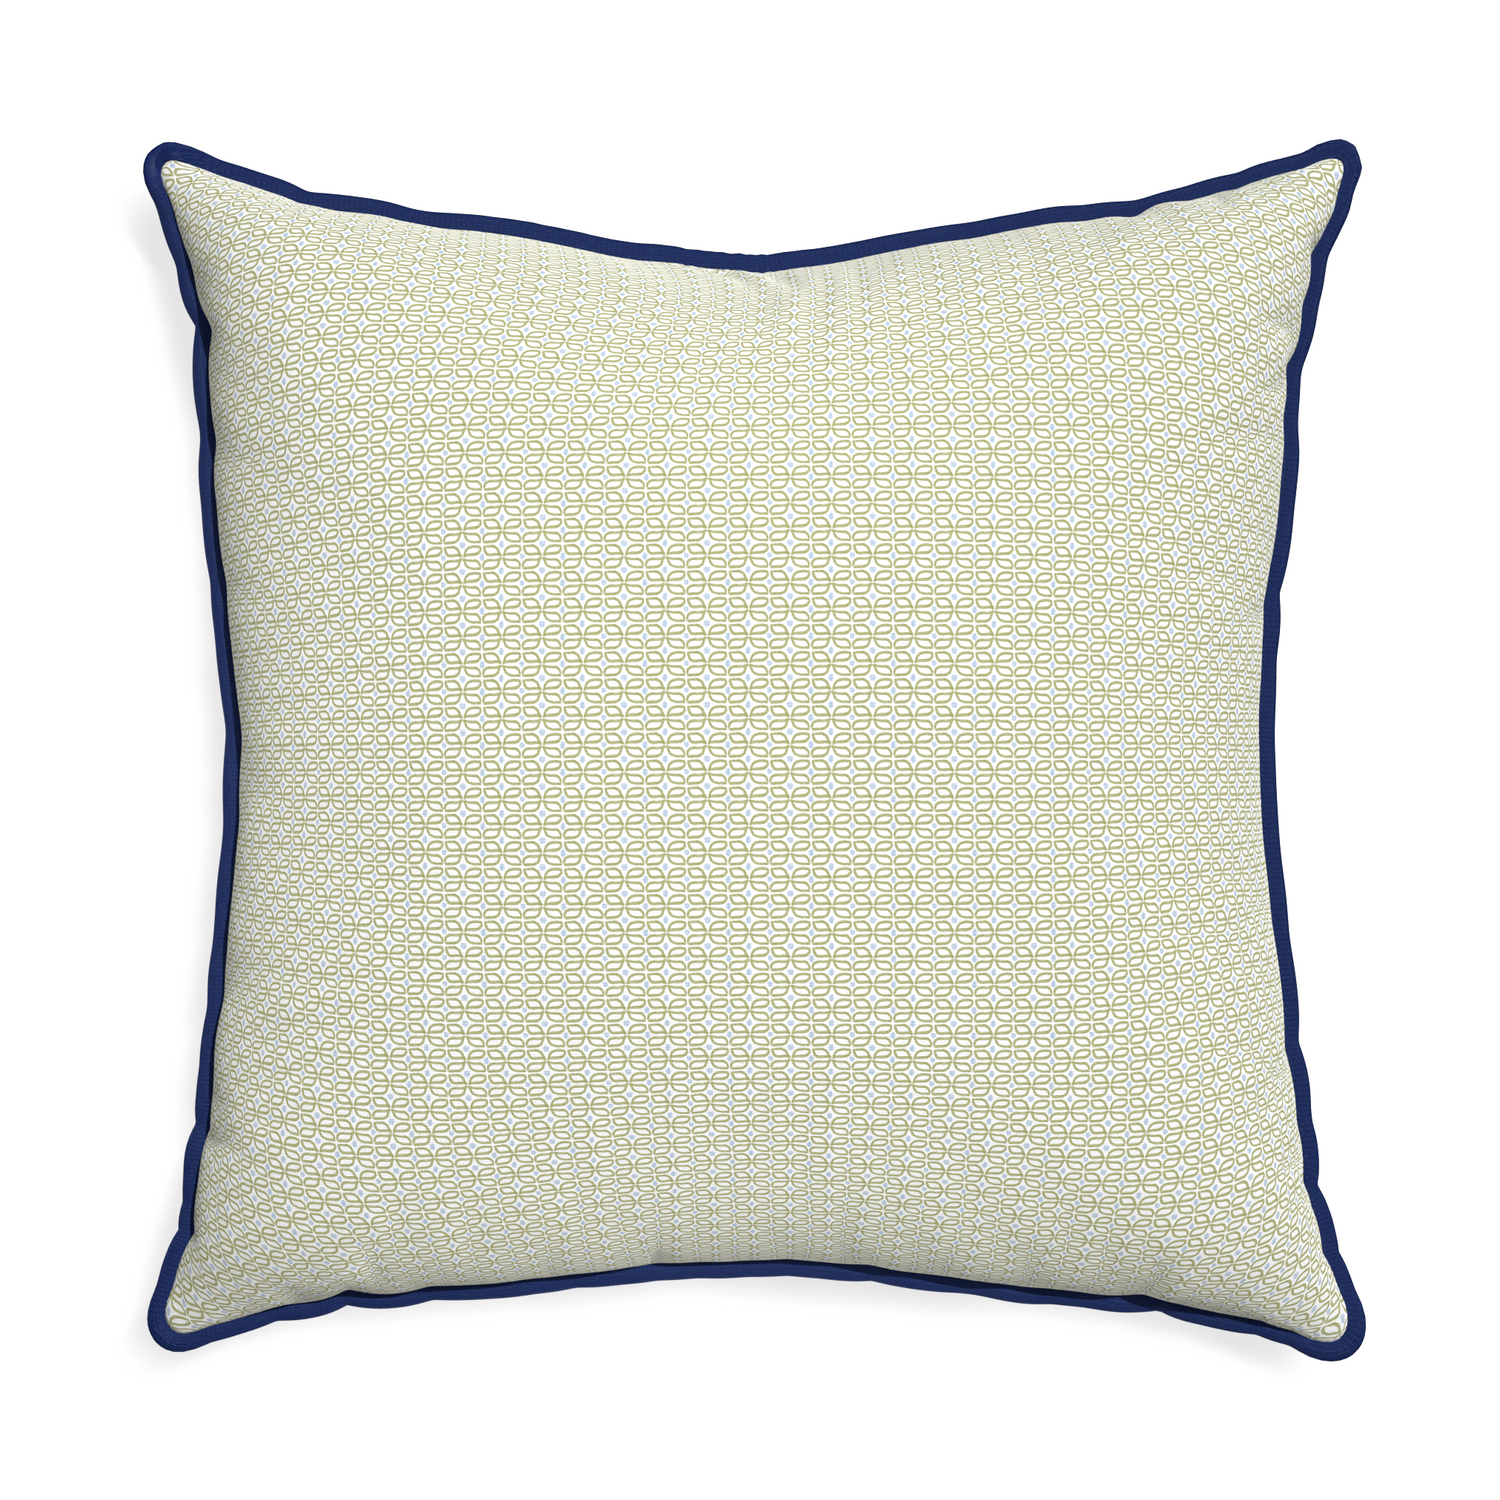 Euro-sham loomi moss custom moss green geometricpillow with midnight piping on white background